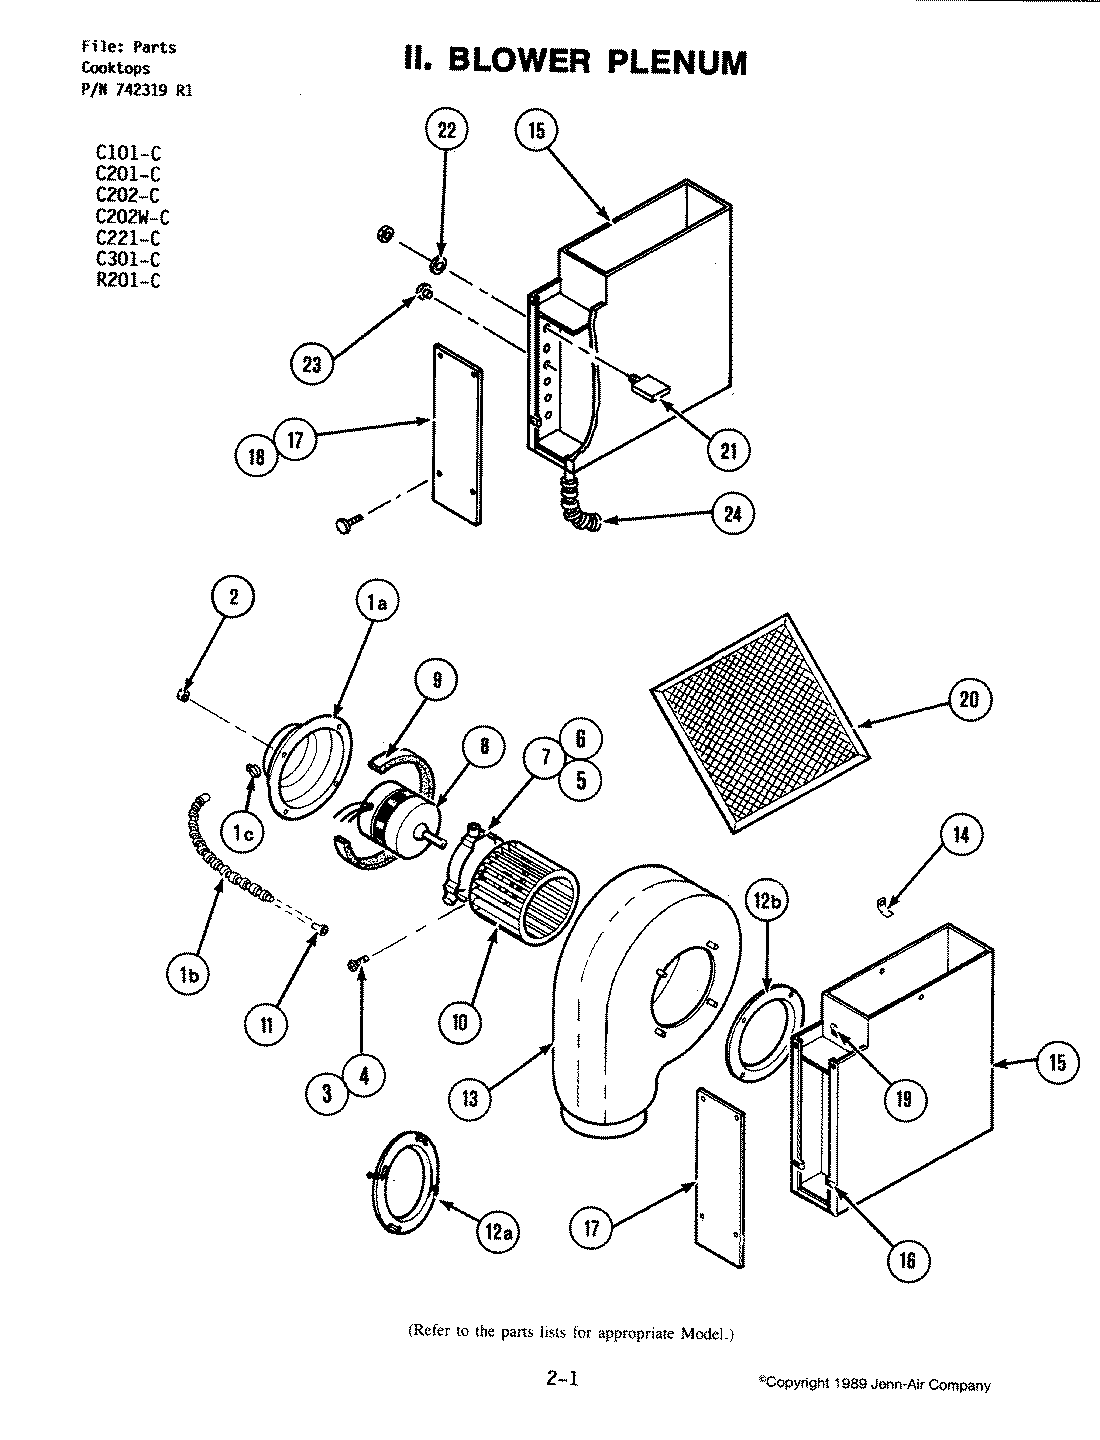 01 - BLOWER ASSEMBLY (C301-C)